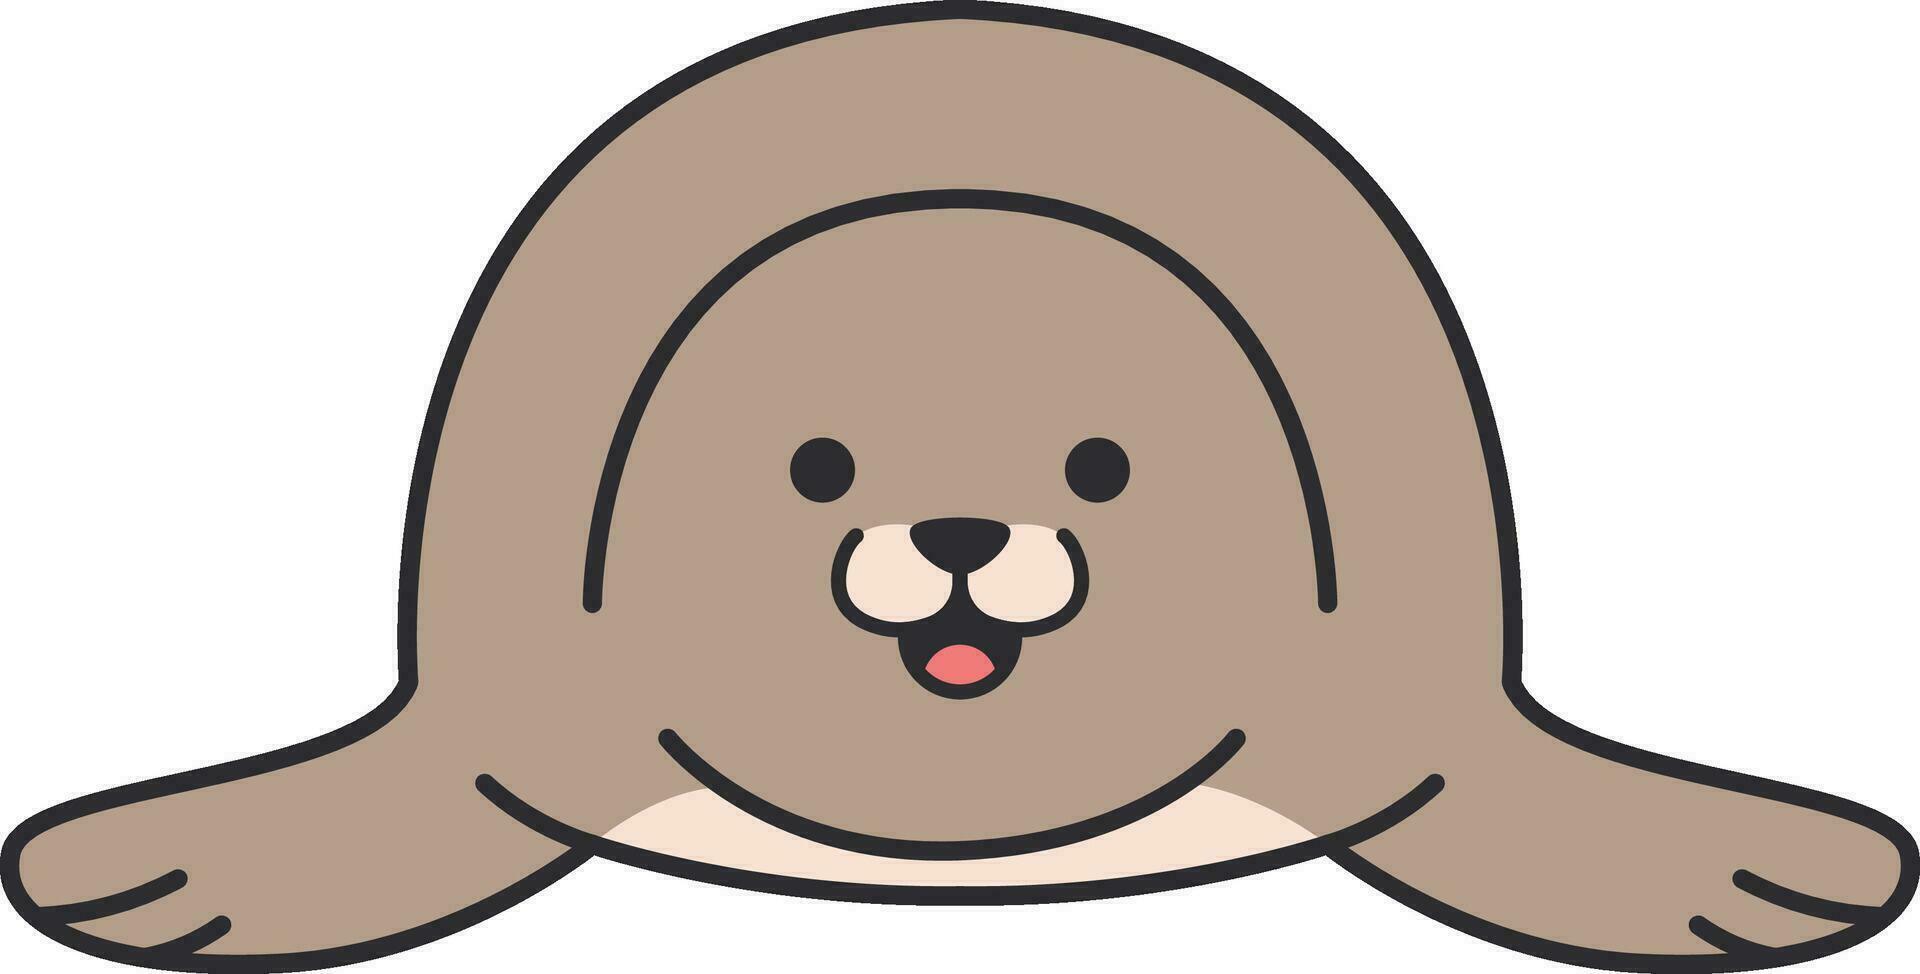 Cute seal cartoon. Vector illustration isolated on a white background.